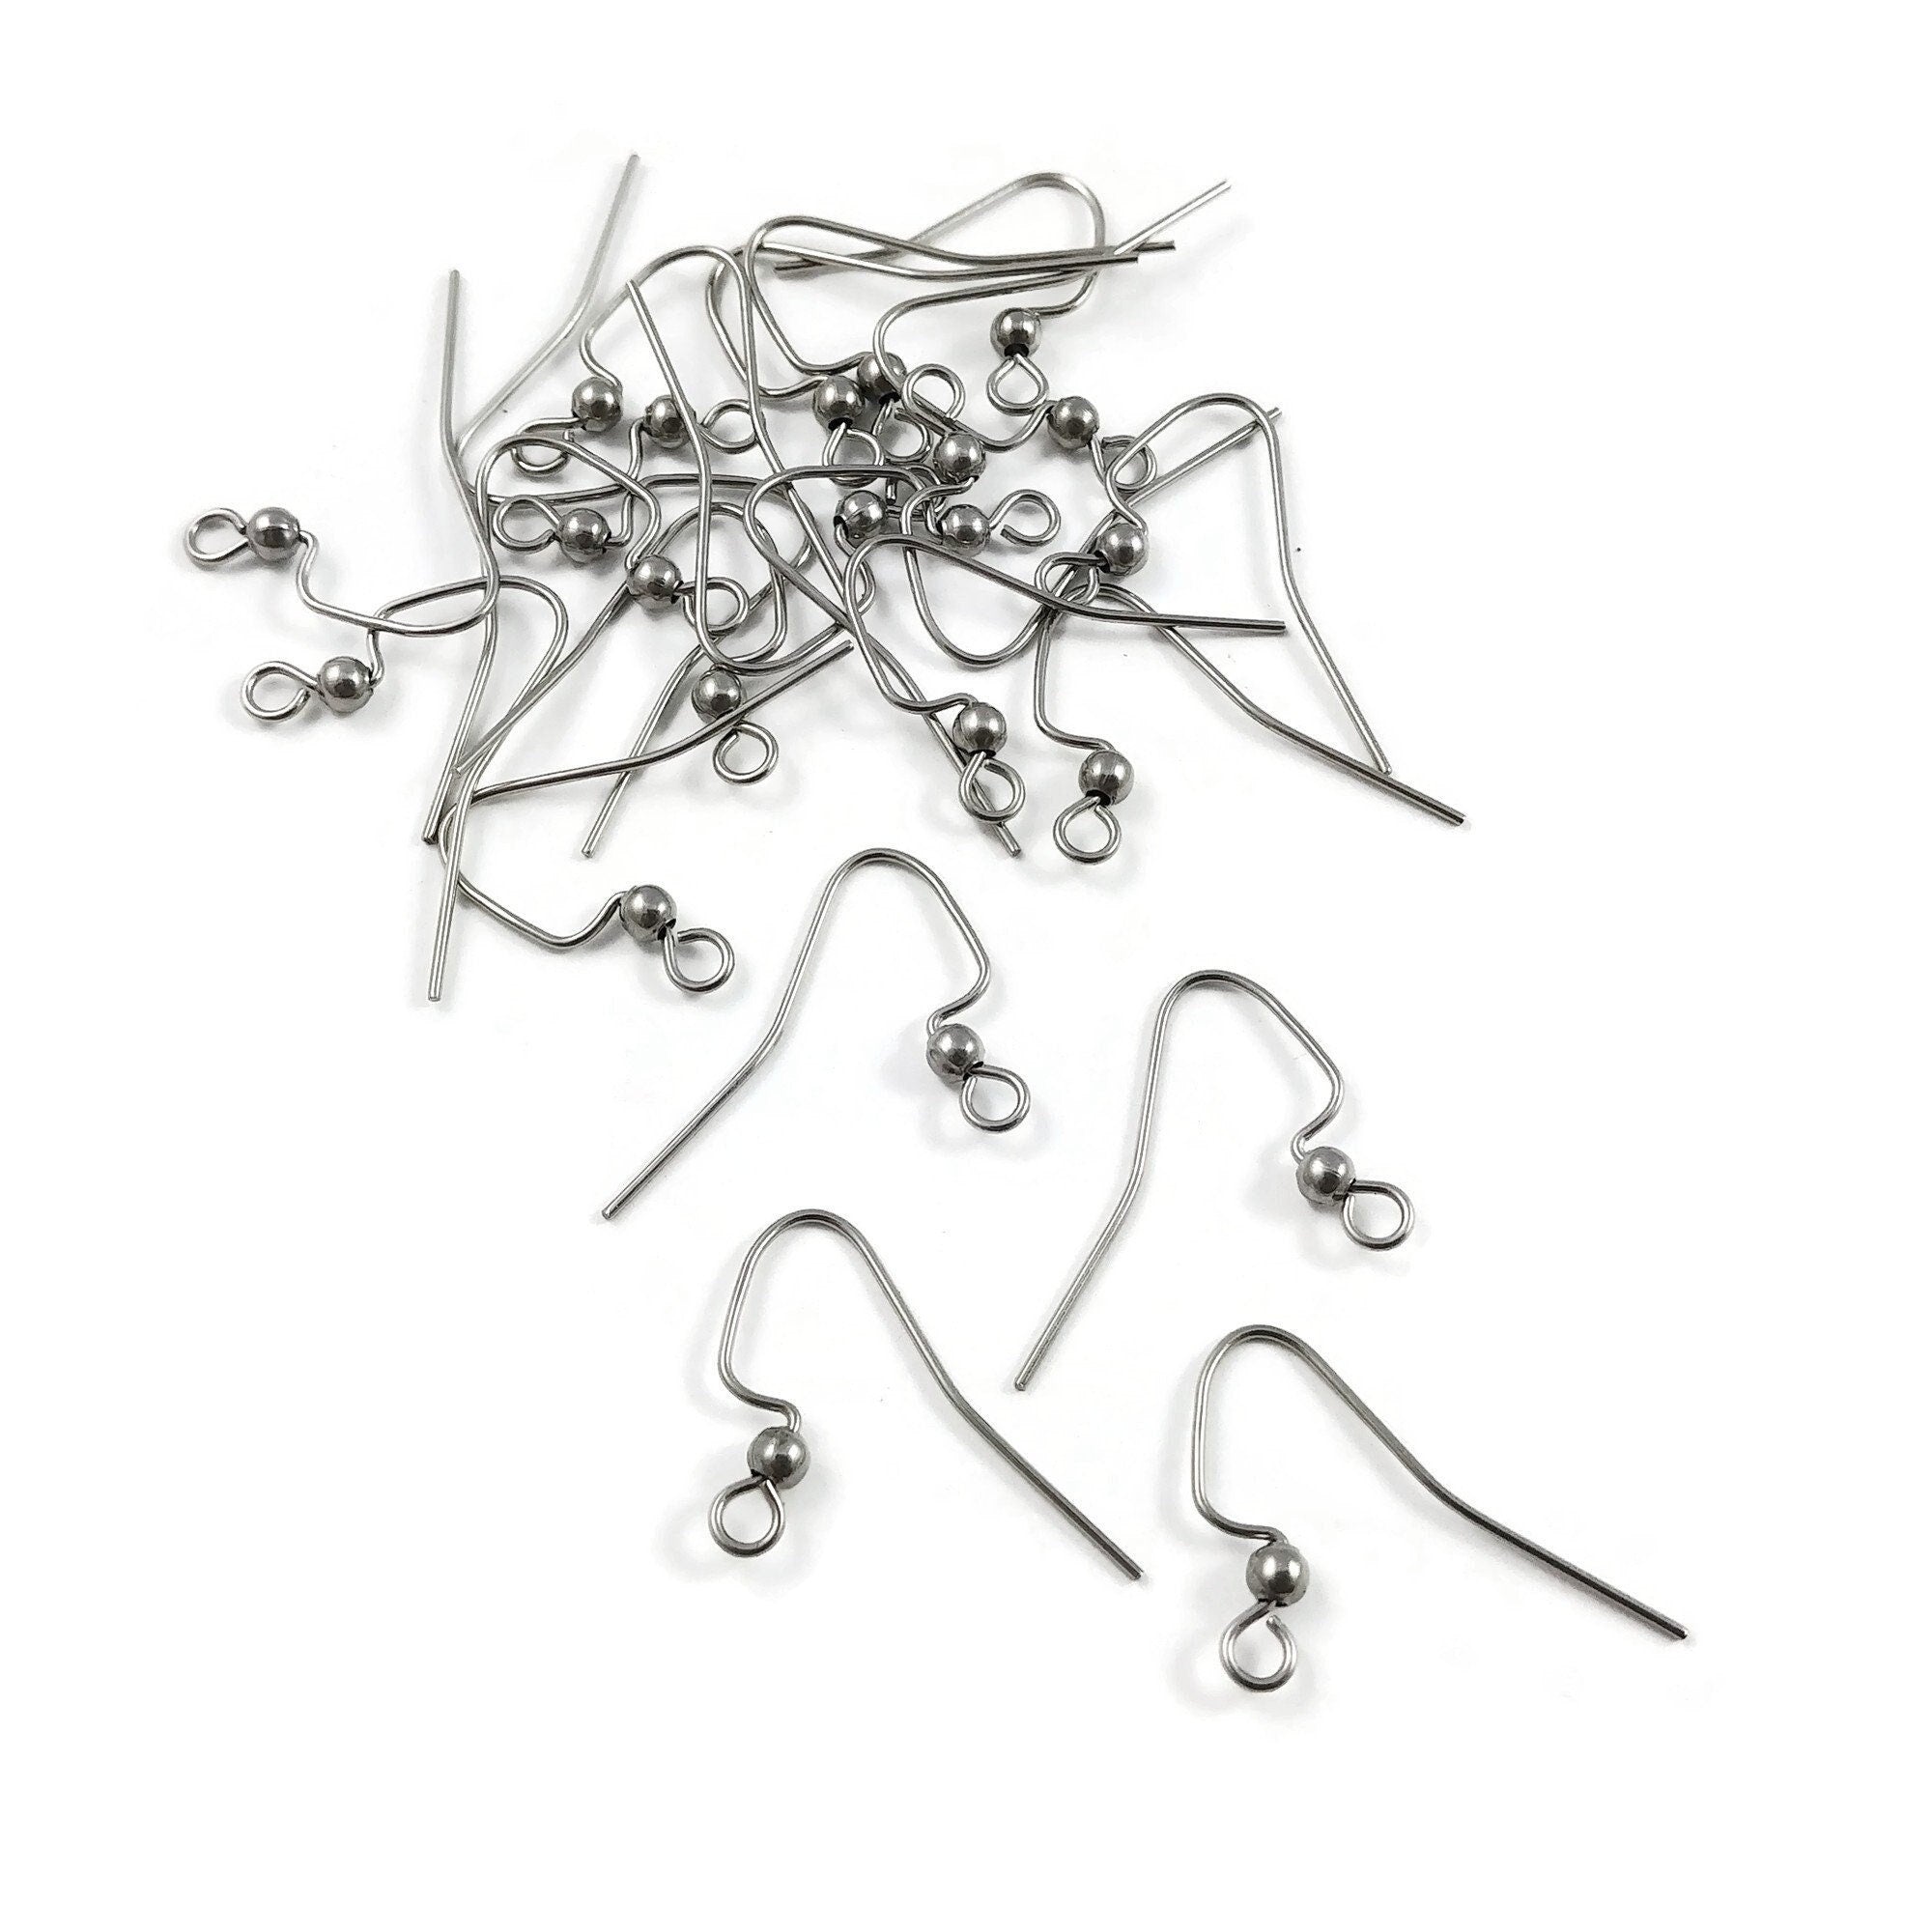 Stainless steel ear wires, Silver french earring hooks 20 pcs (10 pair